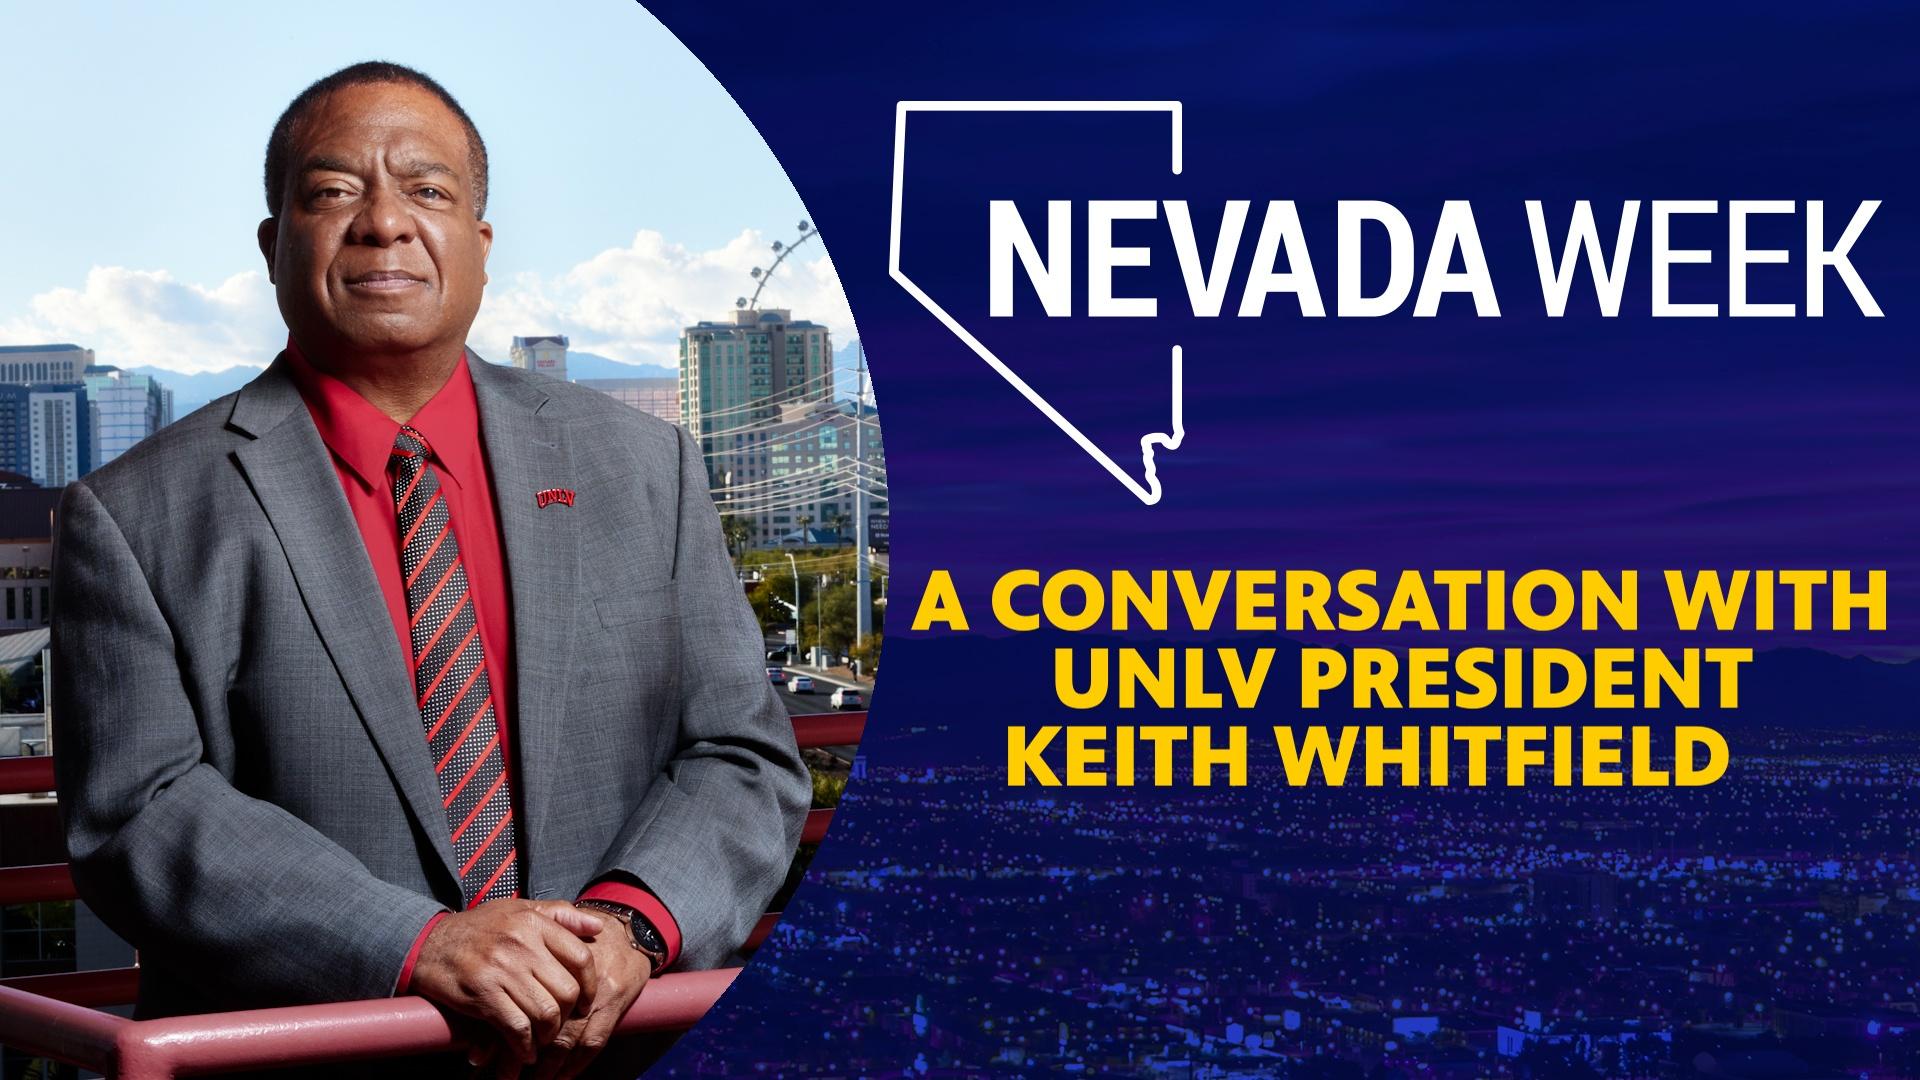 A Conversation with UNLV President Keith Whitfield